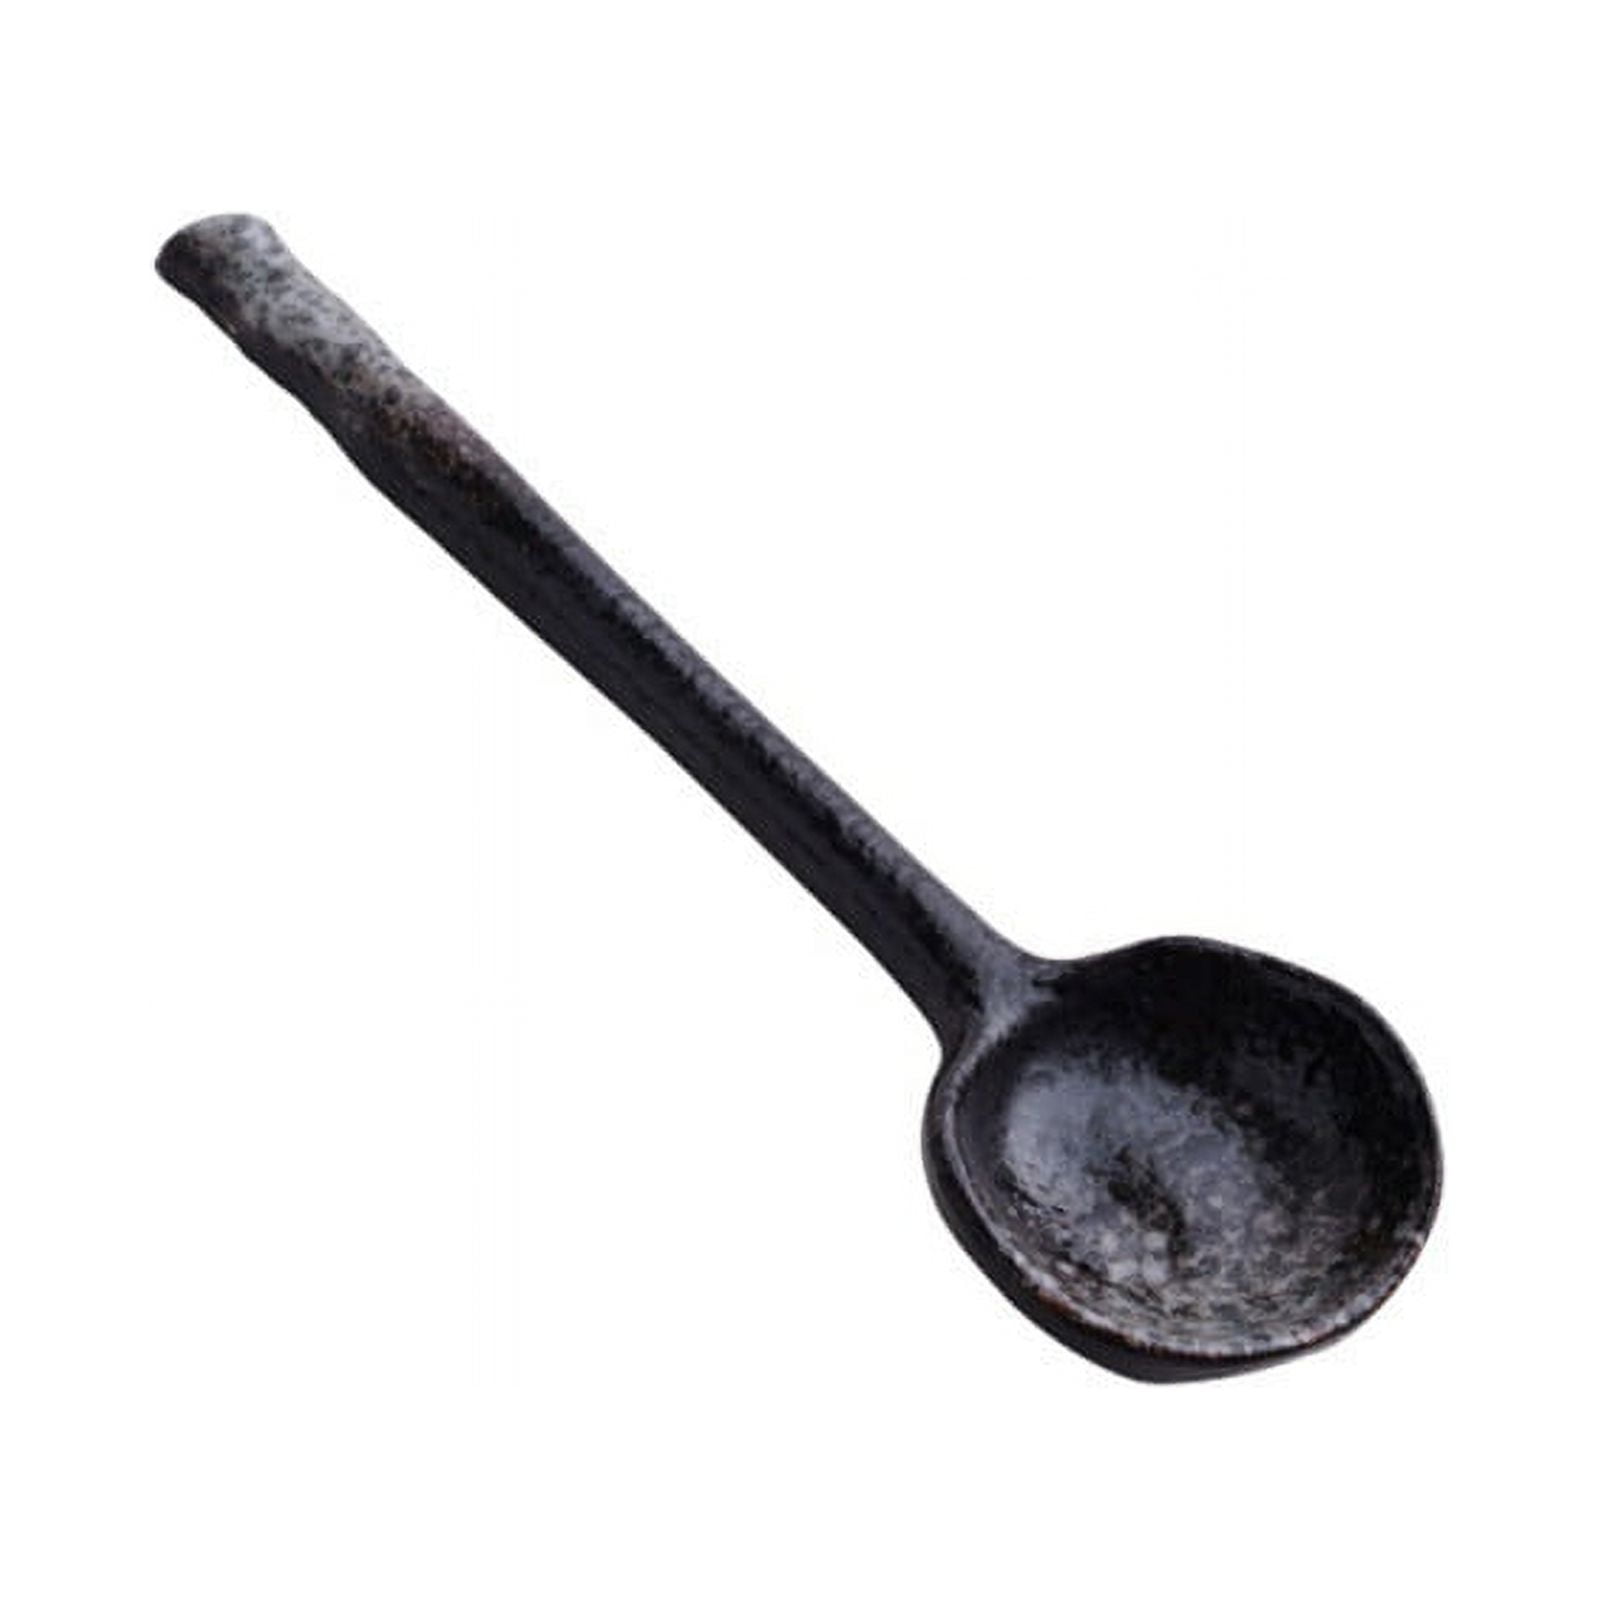 Alvage Japanese-style Retro Ceramic Small Soup Spoon Kitchen Cooking Utensil Tool Soup Teaspoon Catering Kitchen Accessories, Size: 13.5, Black